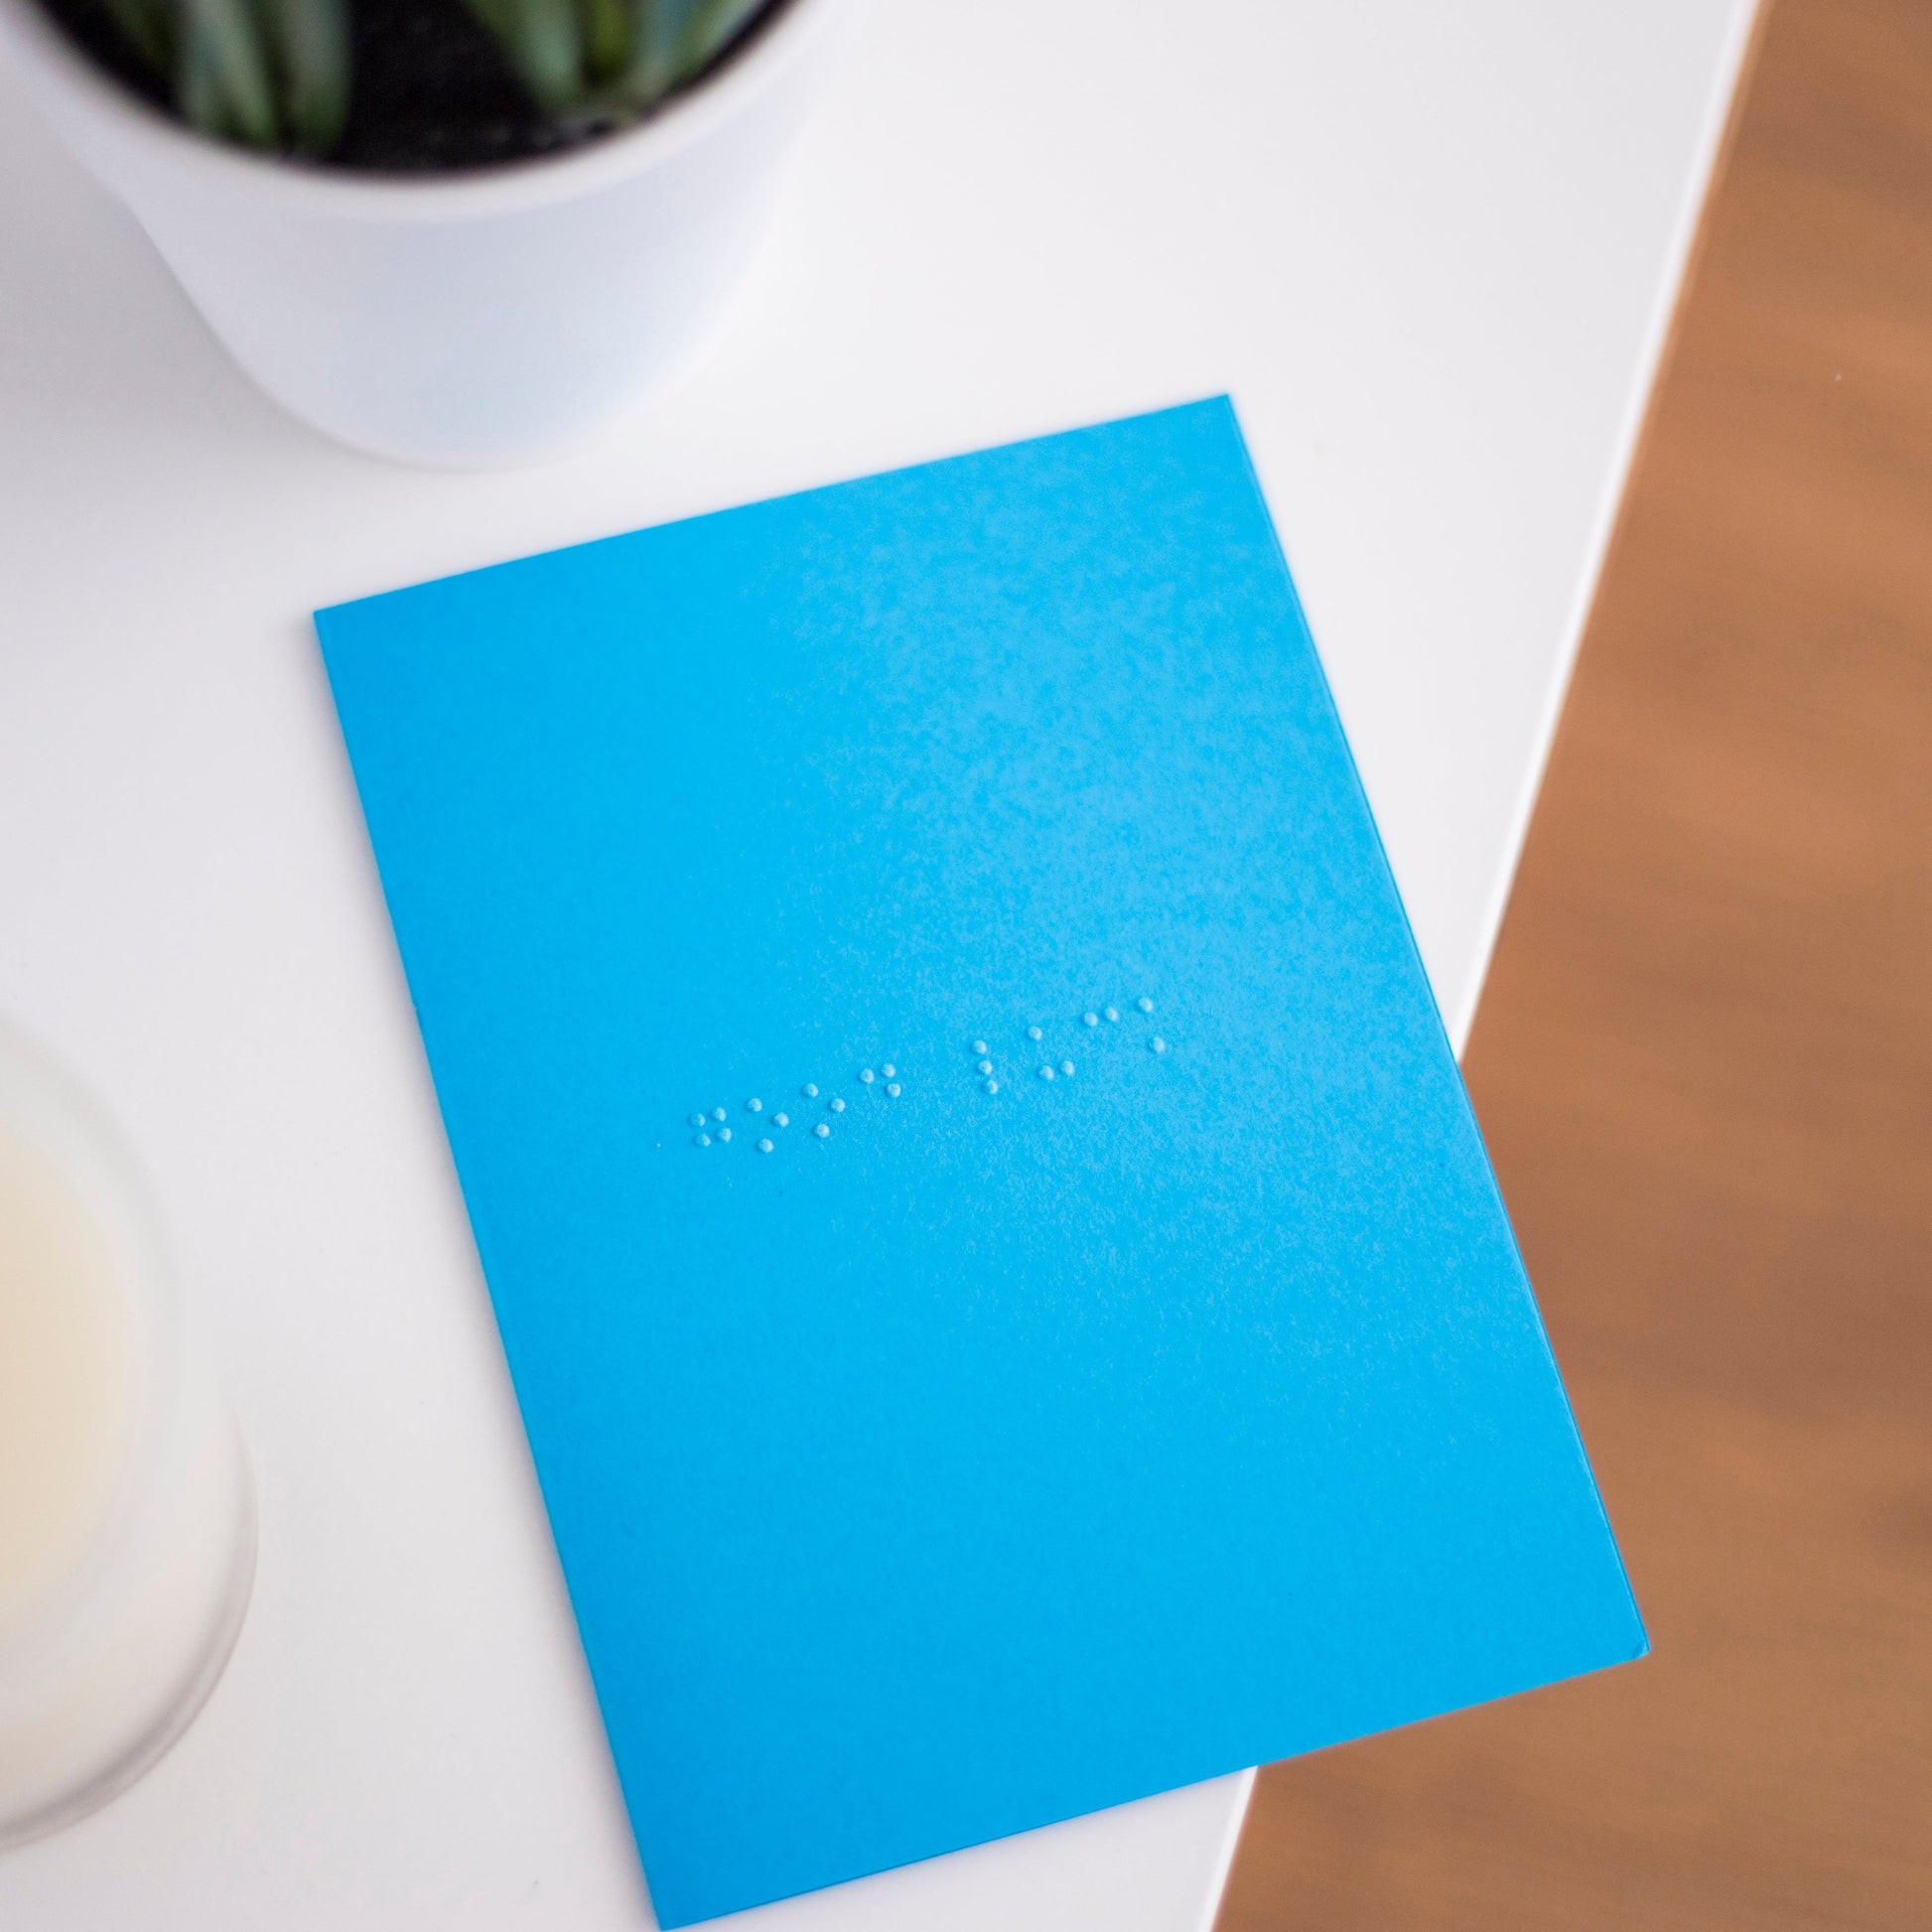 A vibrant blue card lay flat on a table with good luck written in lower case grade one braille. There is a candle in the bottom left and a blurry plant in the top left.